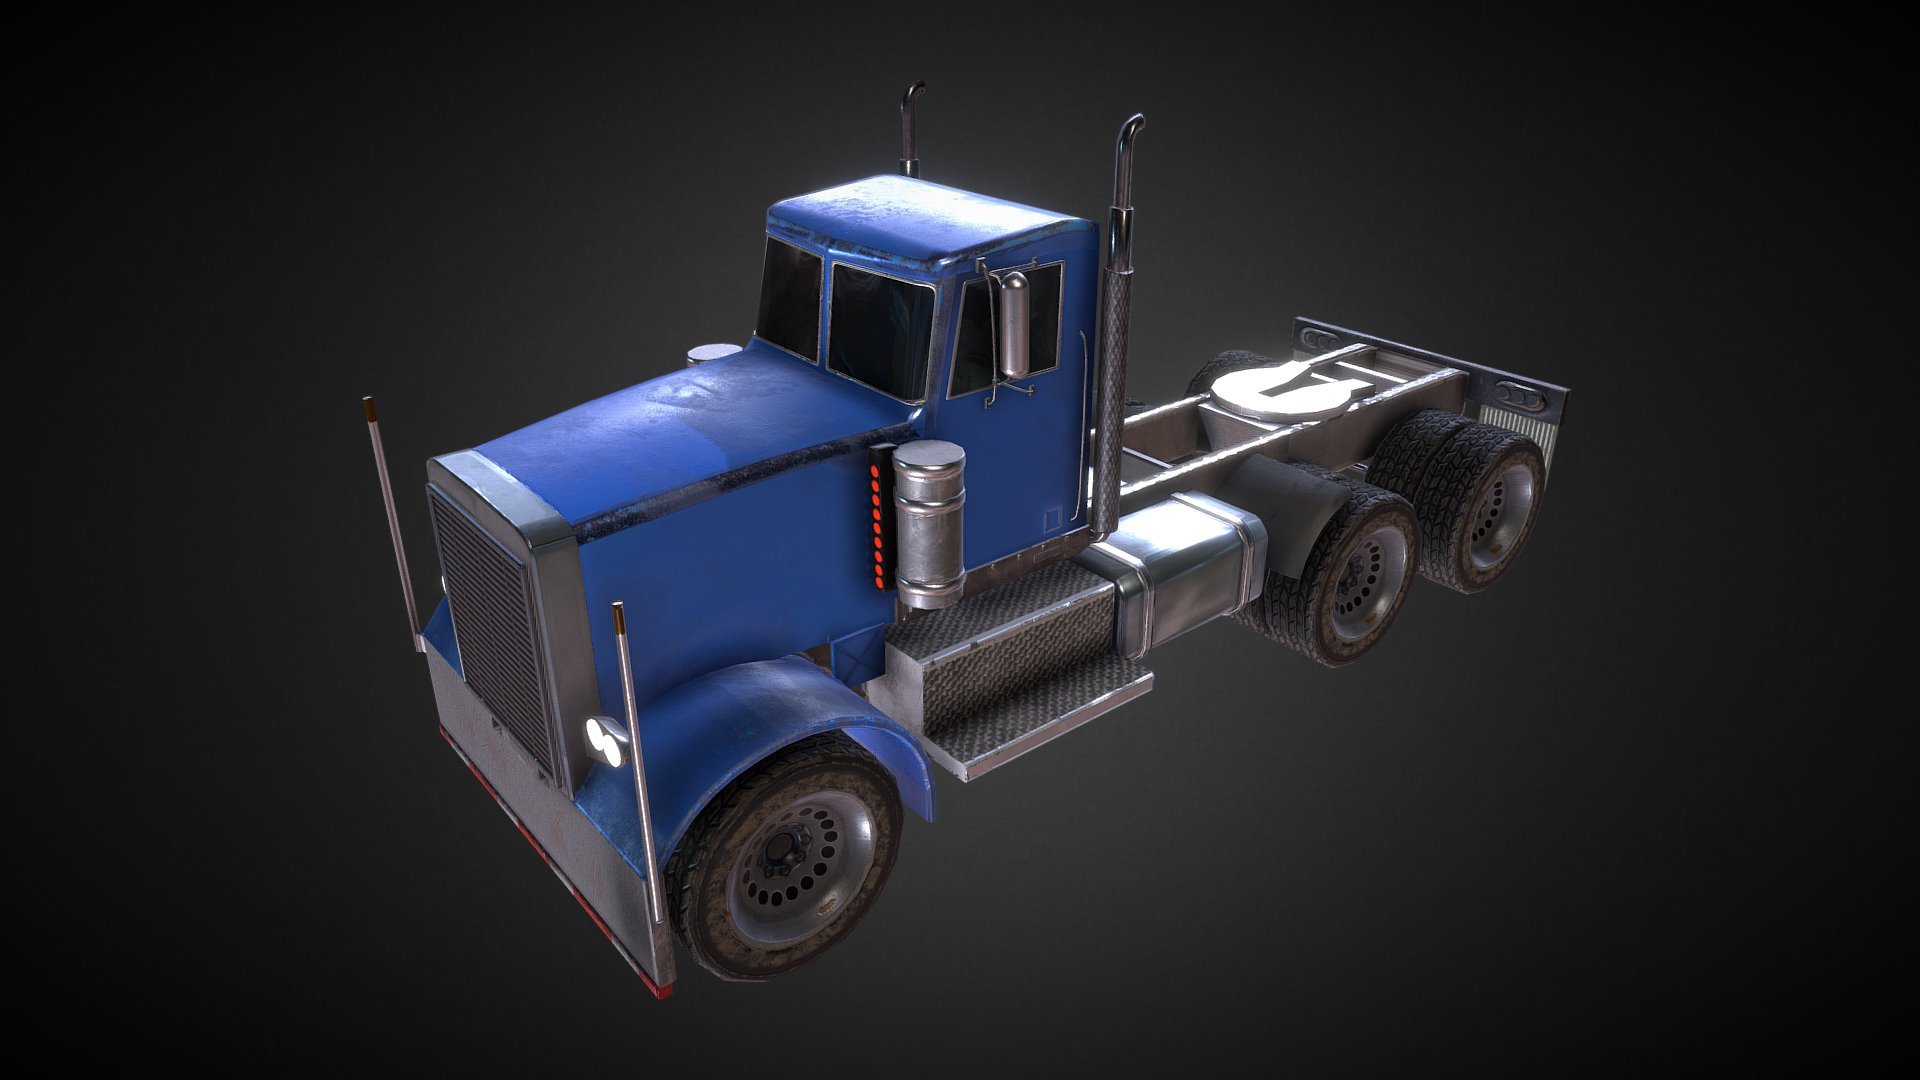 Once again, I gave it a shot. 

Inspired by a truck I once was while playing GTA V, I made this model to test my skills after a perioid of downtime and procrastination. It's been quite the challenge (struggeling especially with normal map baking and the overall shape) but I'm happy I saw it through.

visit www.jesperbj.com for more 3d model